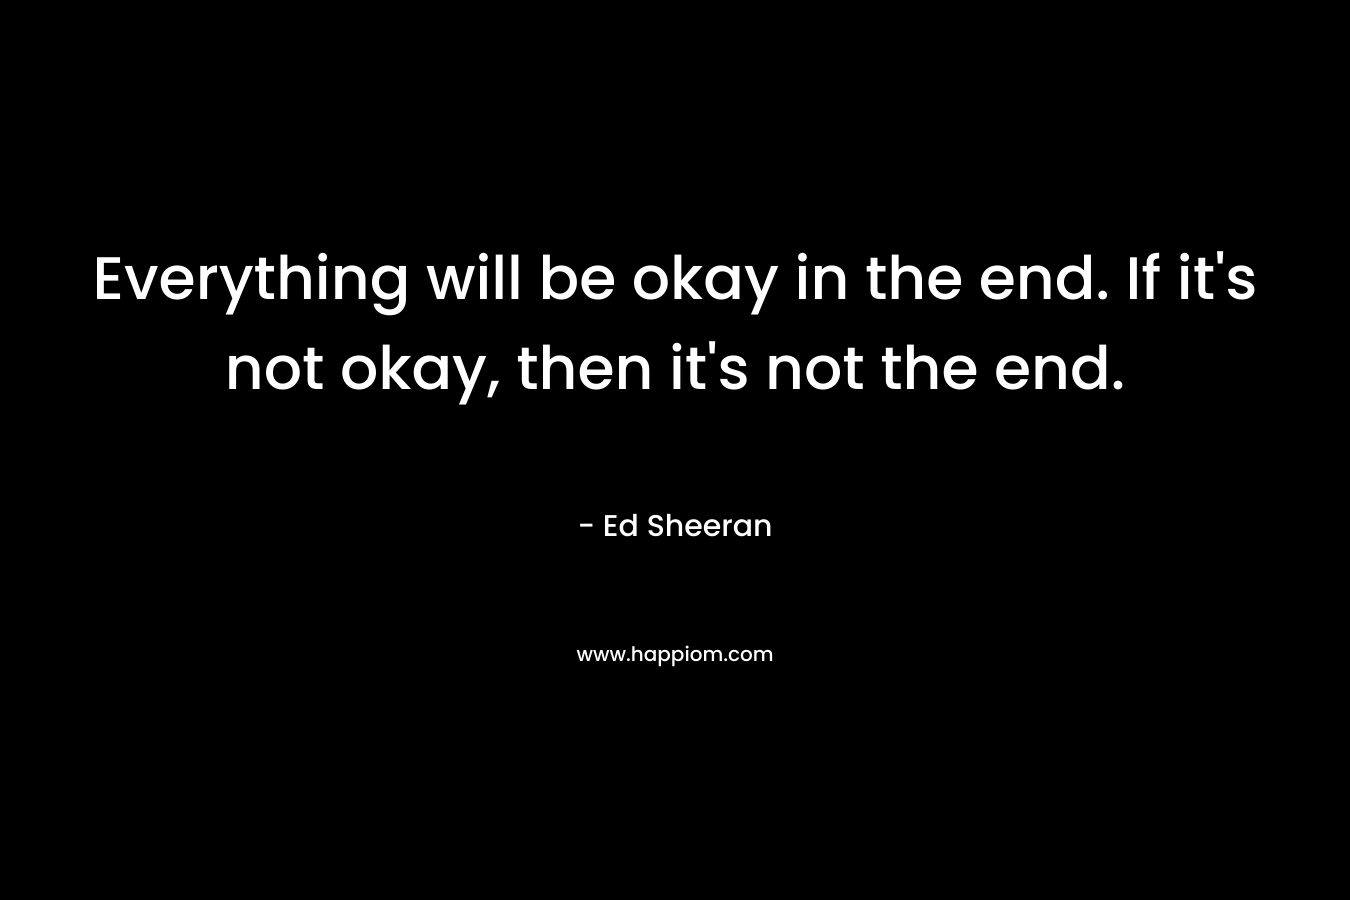 Everything will be okay in the end. If it's not okay, then it's not the end.